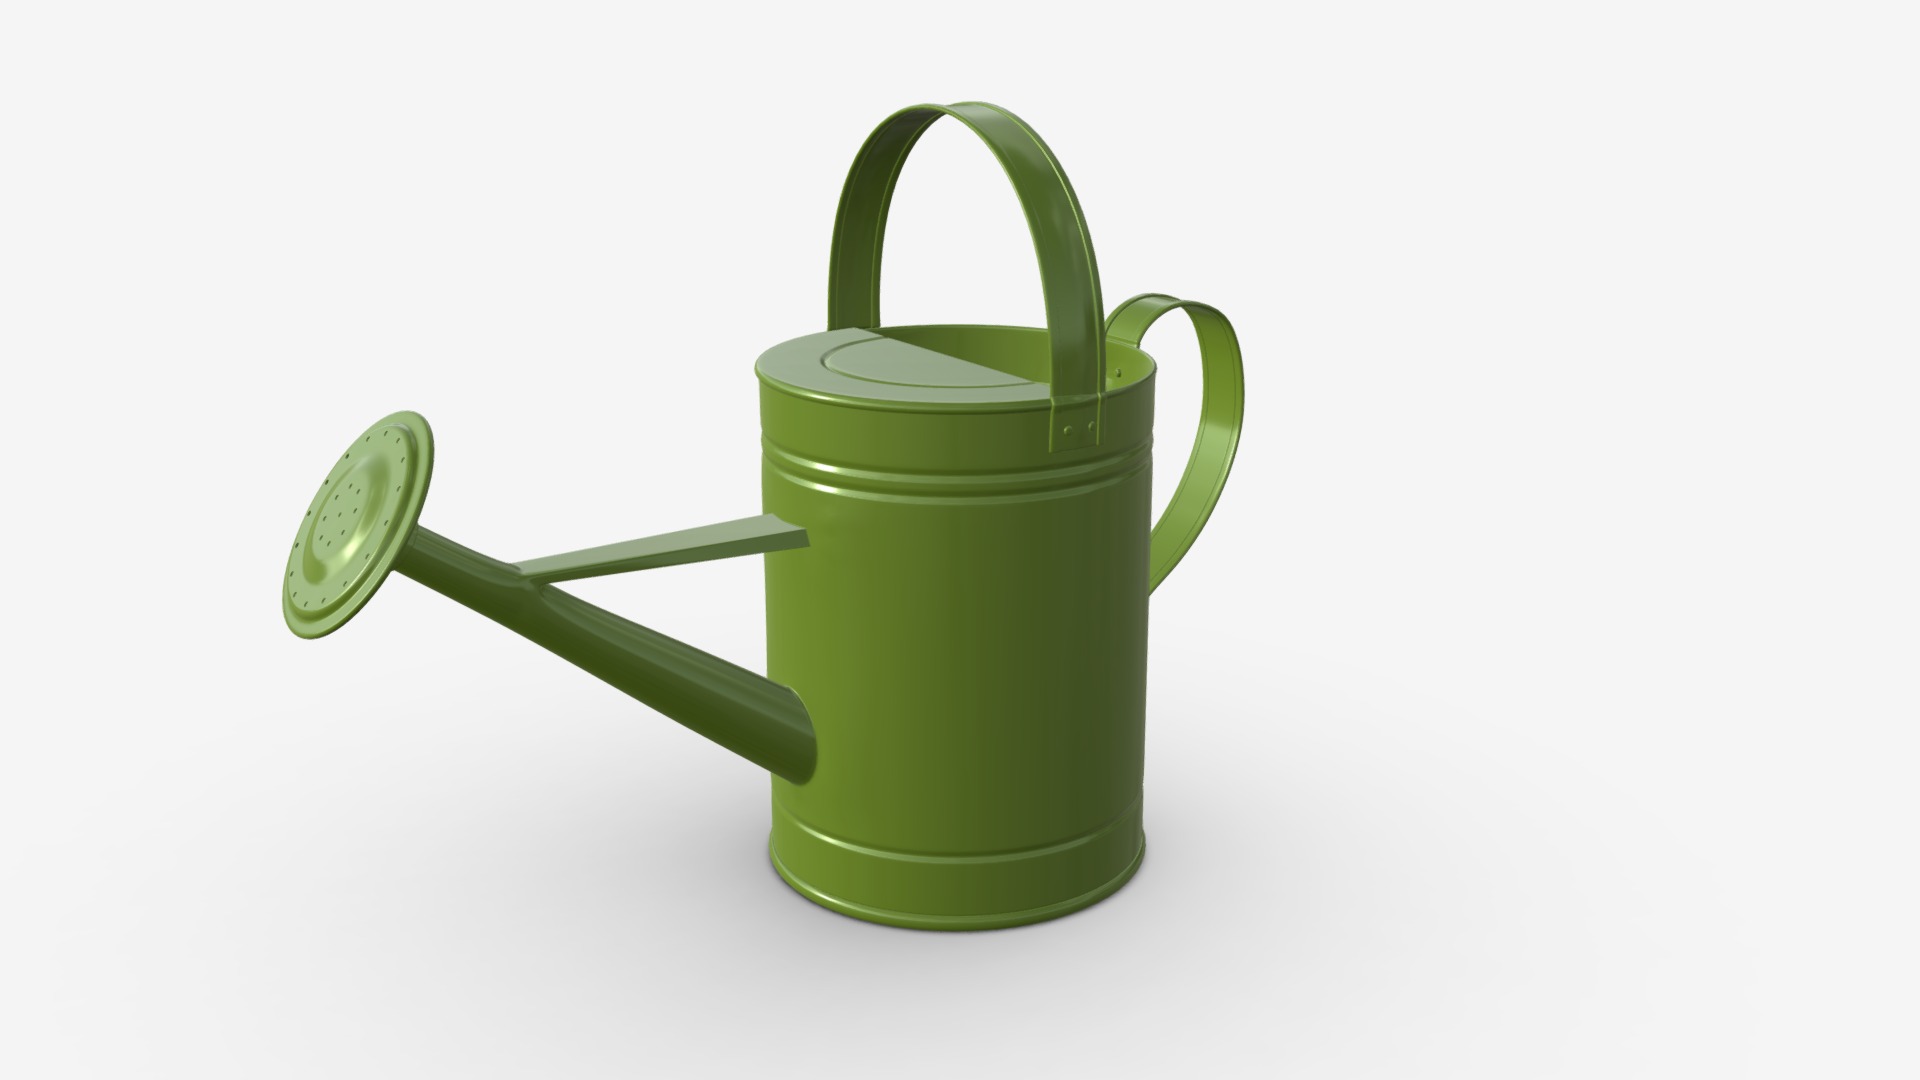 3D model Funny watering can - This is a 3D model of the Funny watering can. The 3D model is about a green watering can.